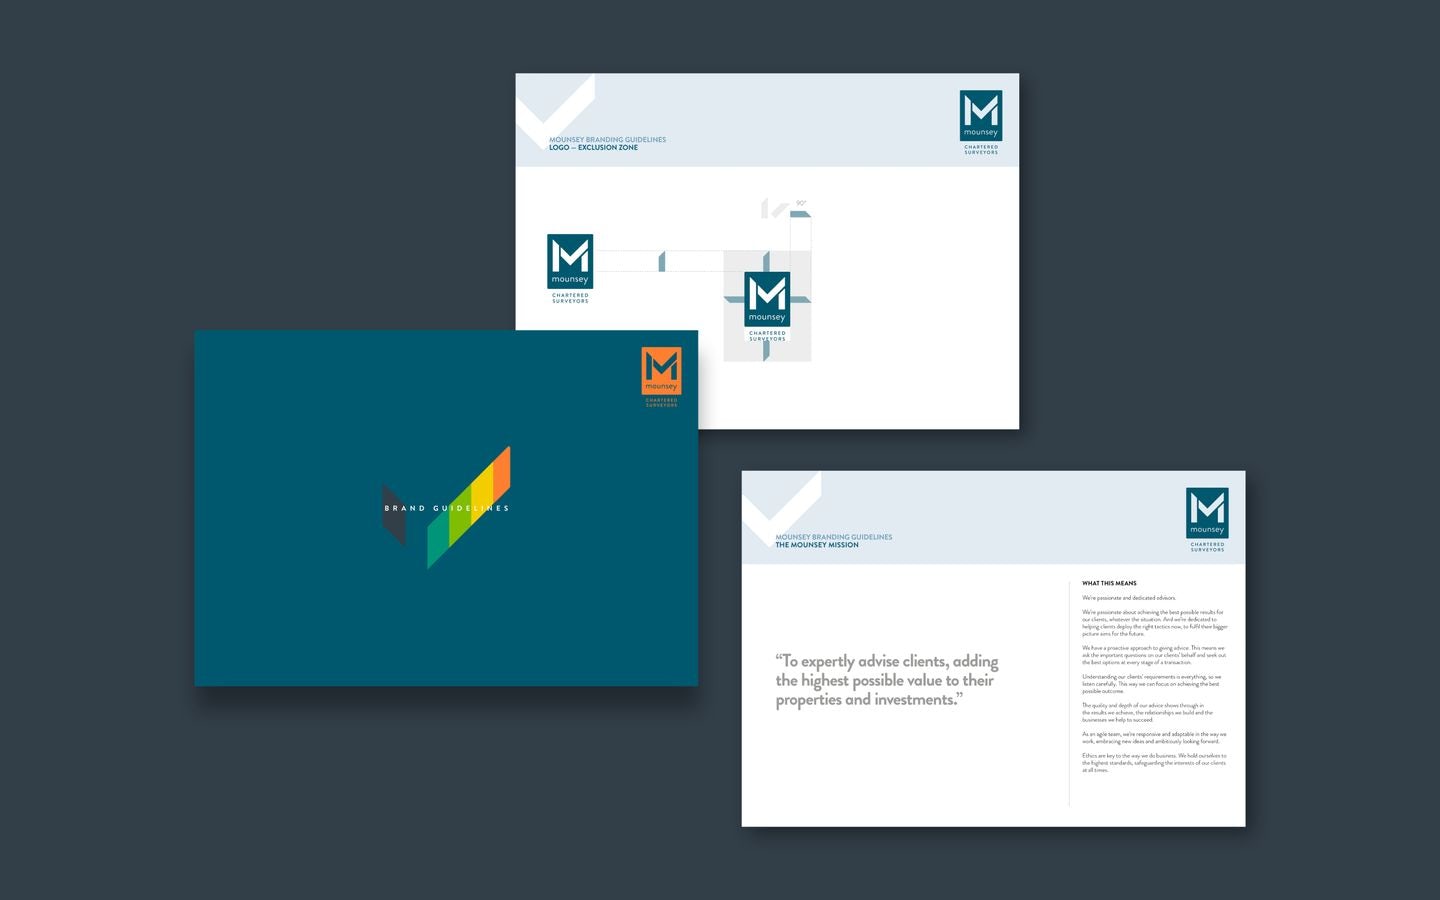 Collection of Brand Guidelines images for Mounsey Chartered Surveyors